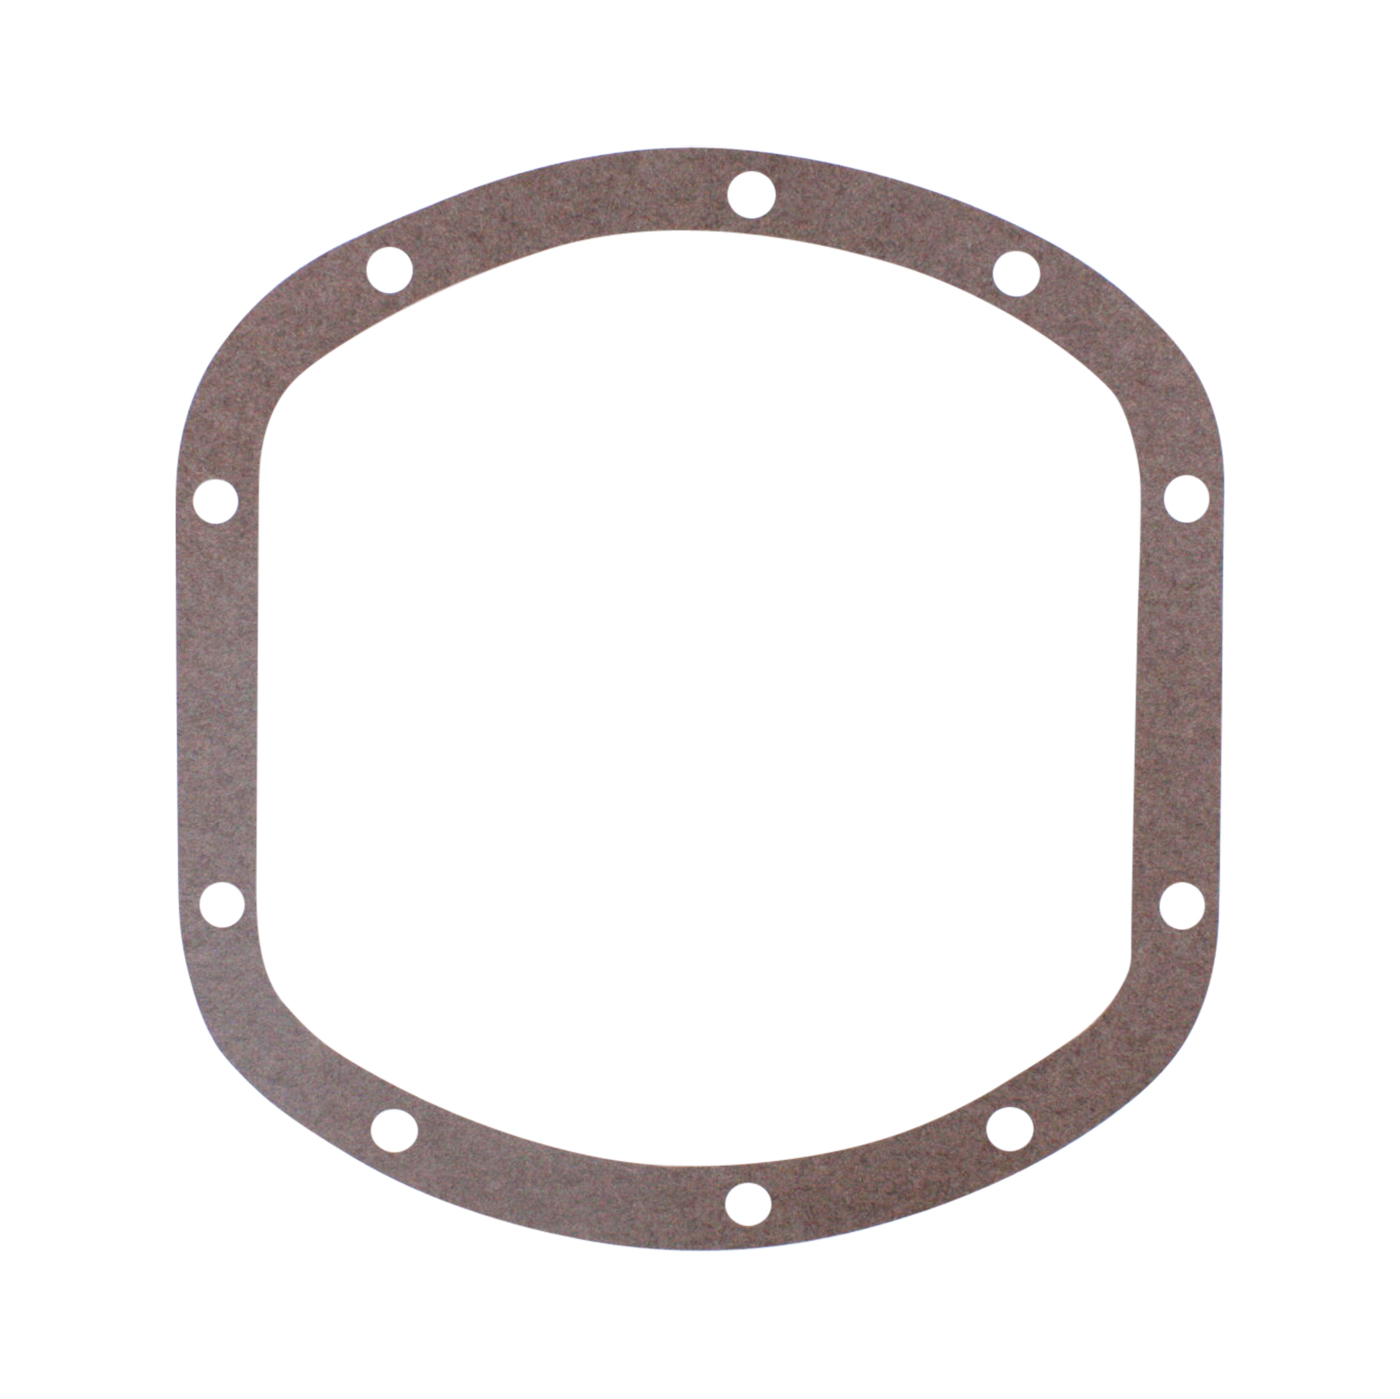 Replacement cover gasket for Dana 30 